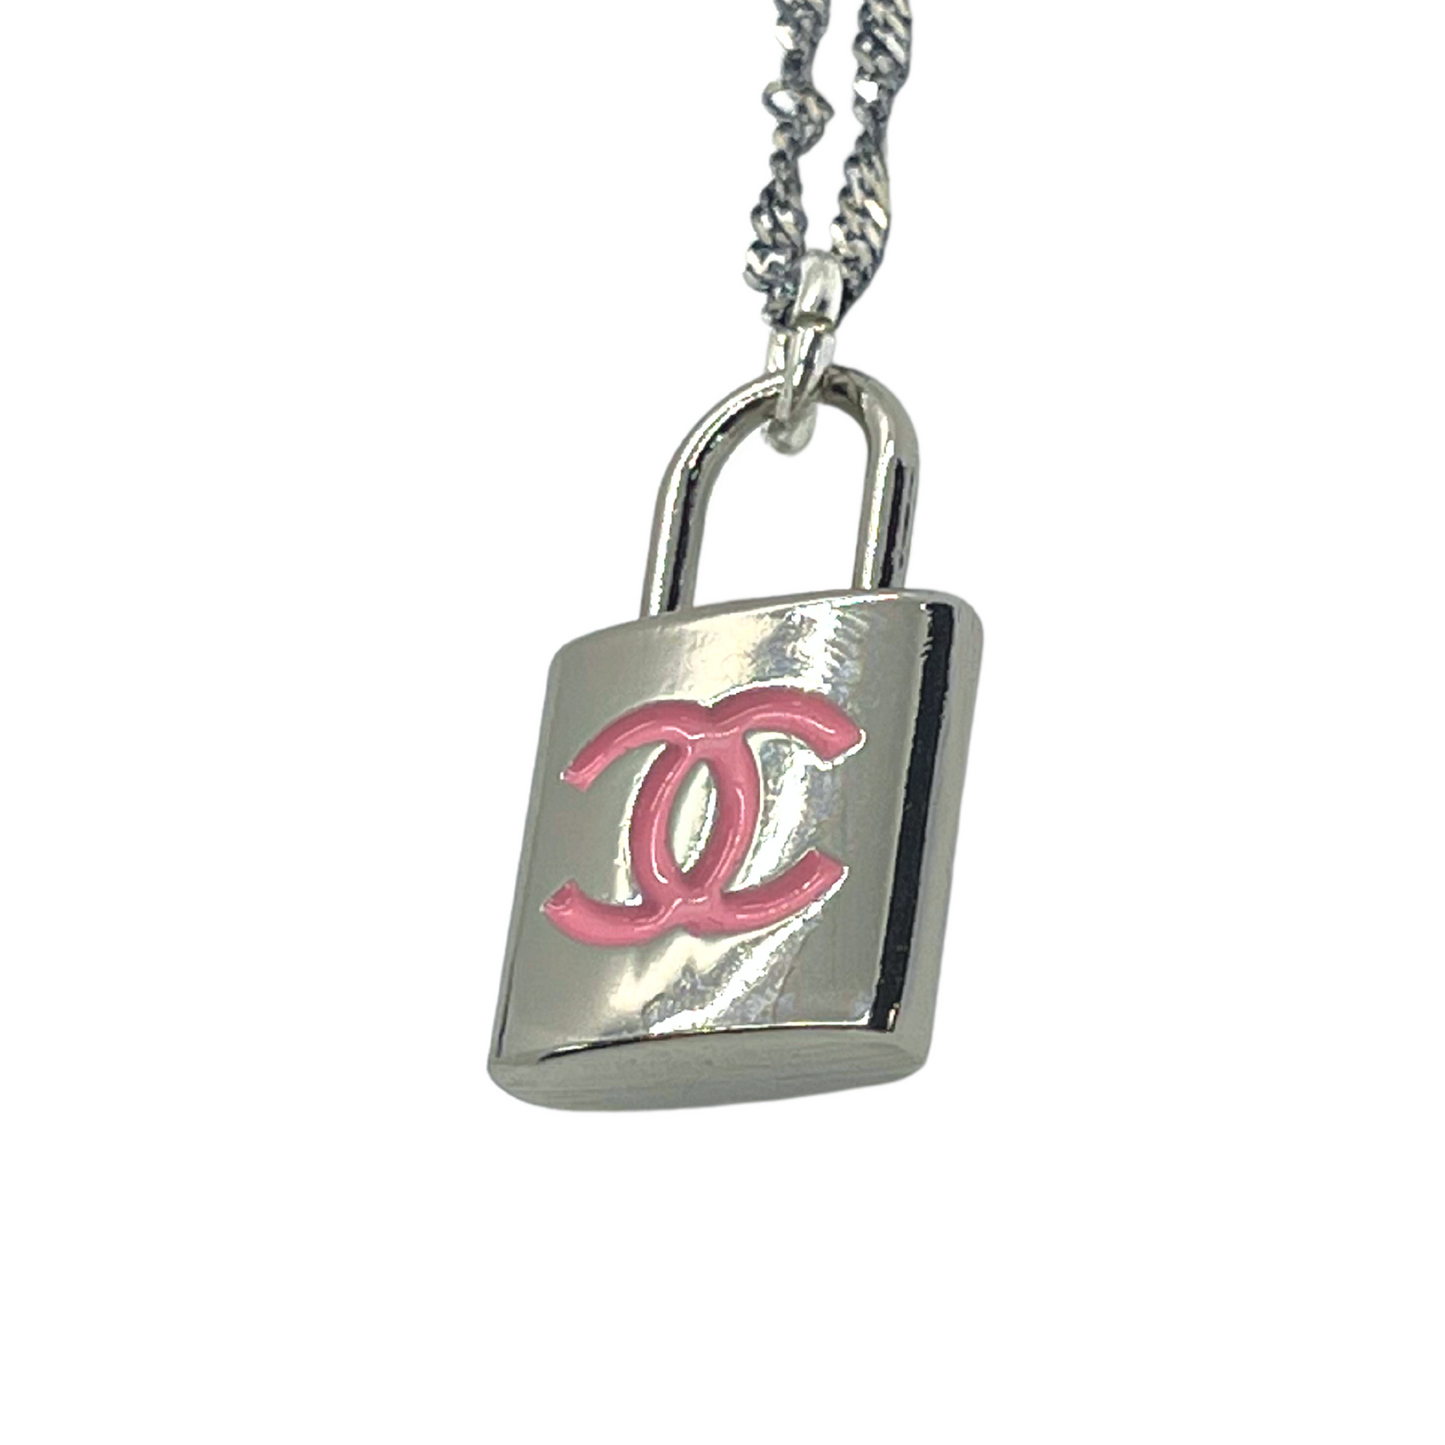 Authentic Chanel Pink Lock Pendant | Reworked Silver 20 Necklace